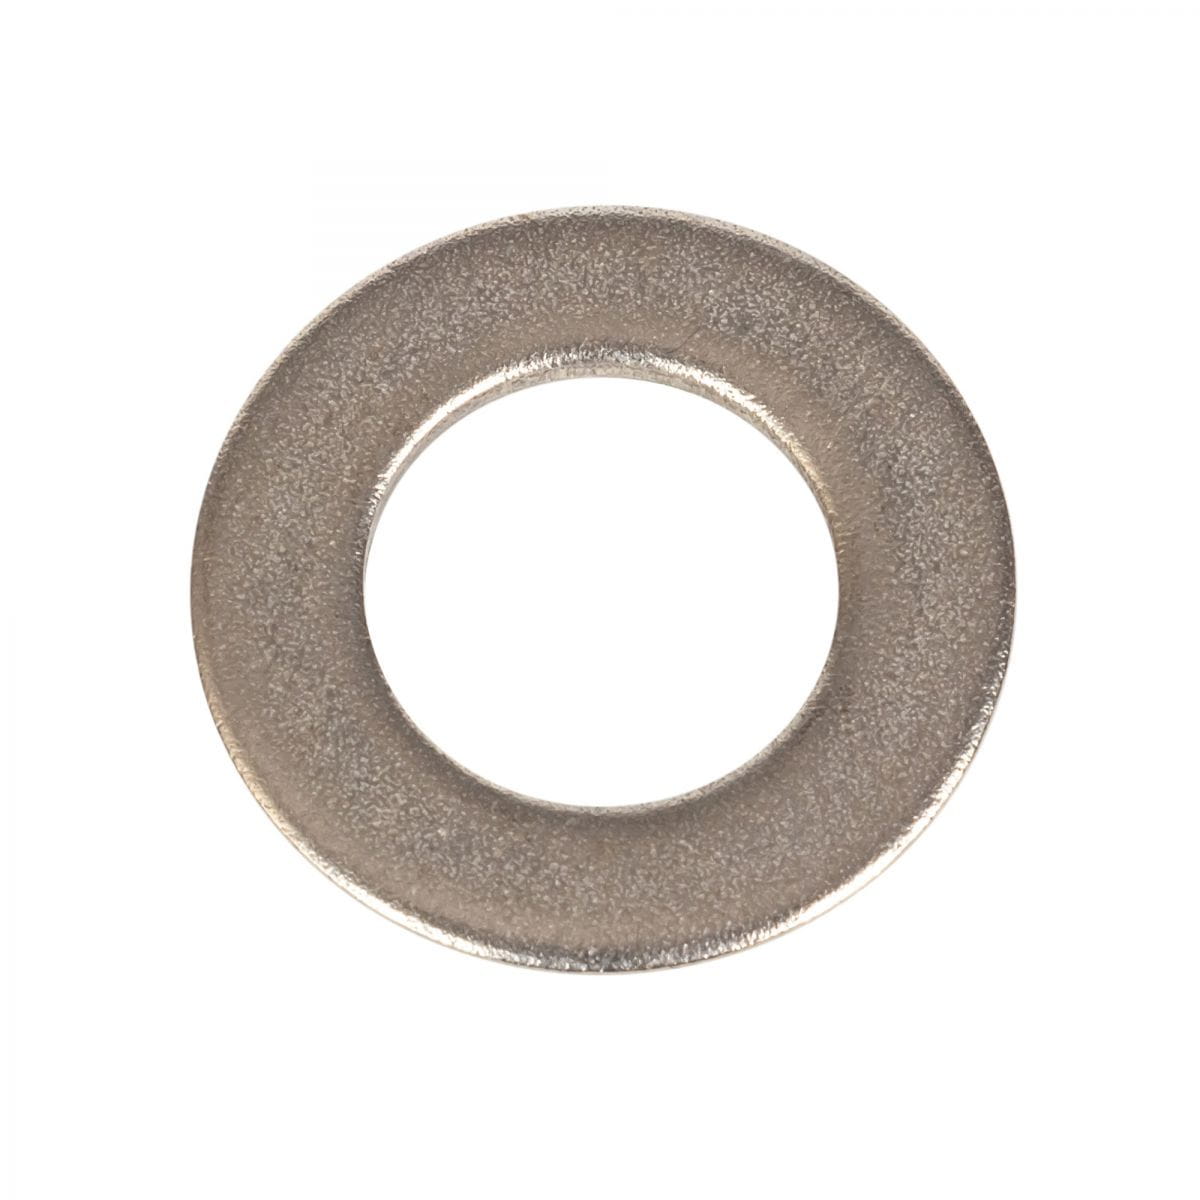 ASTM F436 Washer, SS316, 7/8 Inch, Flat Type